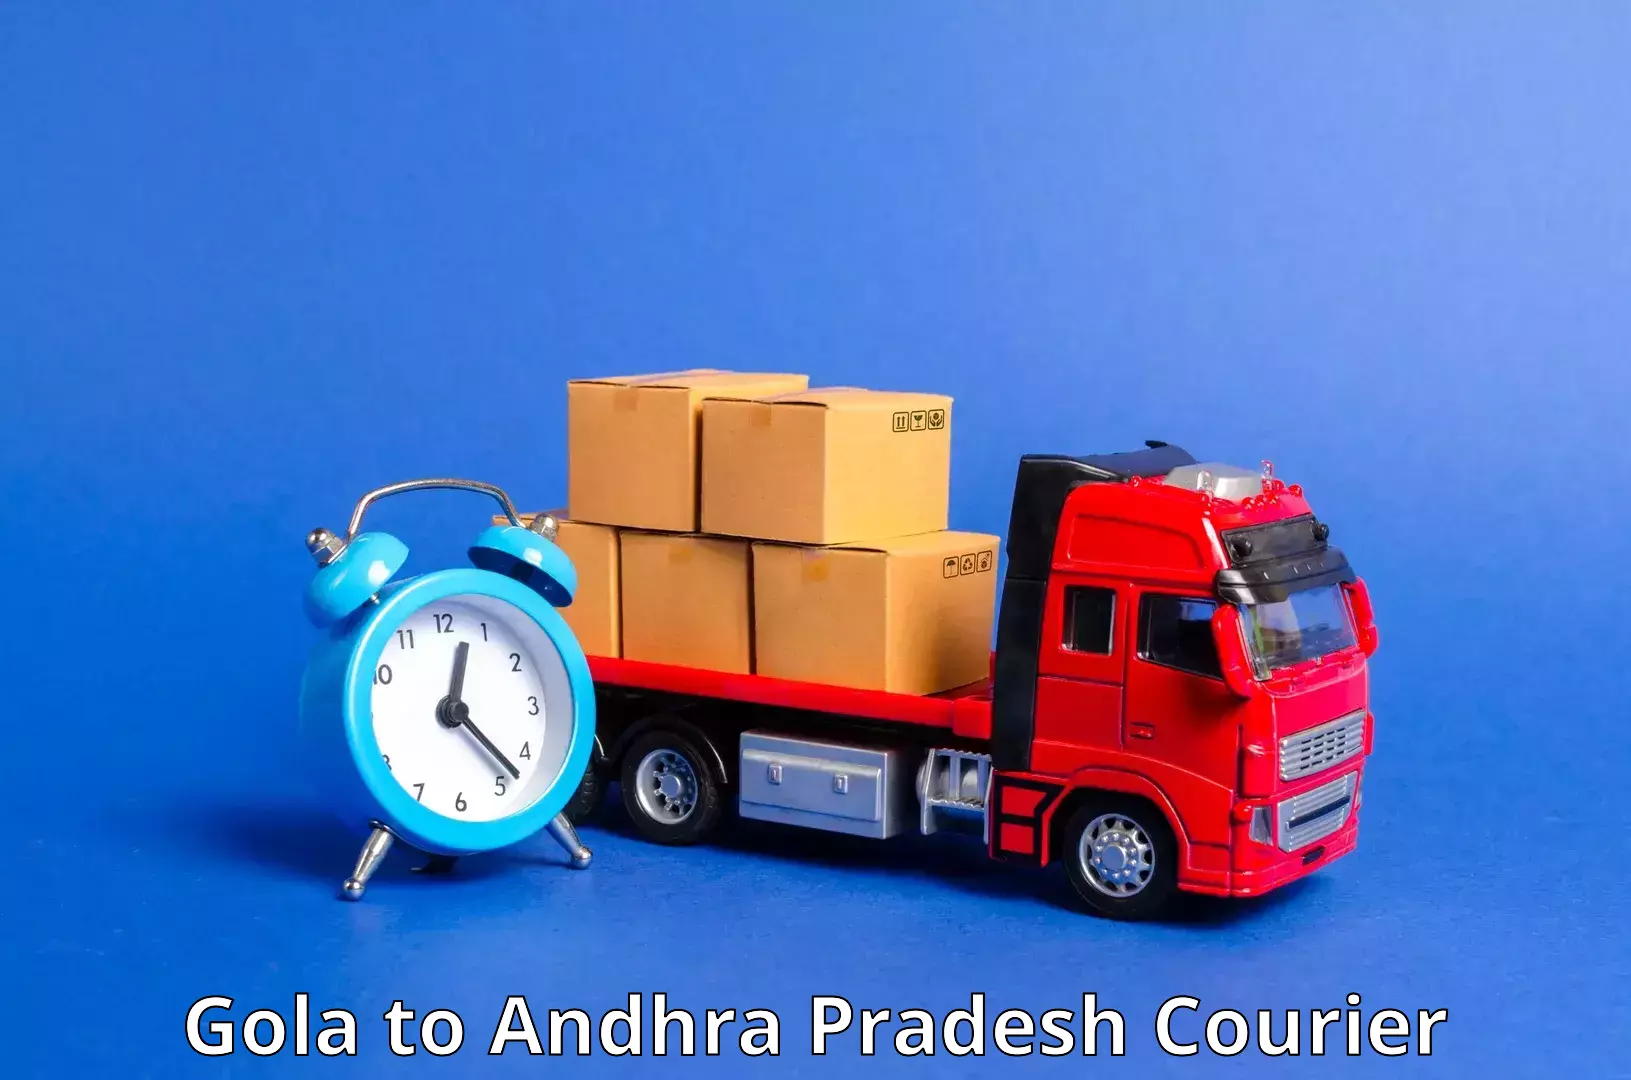 Comprehensive parcel tracking Gola to Anakapalli